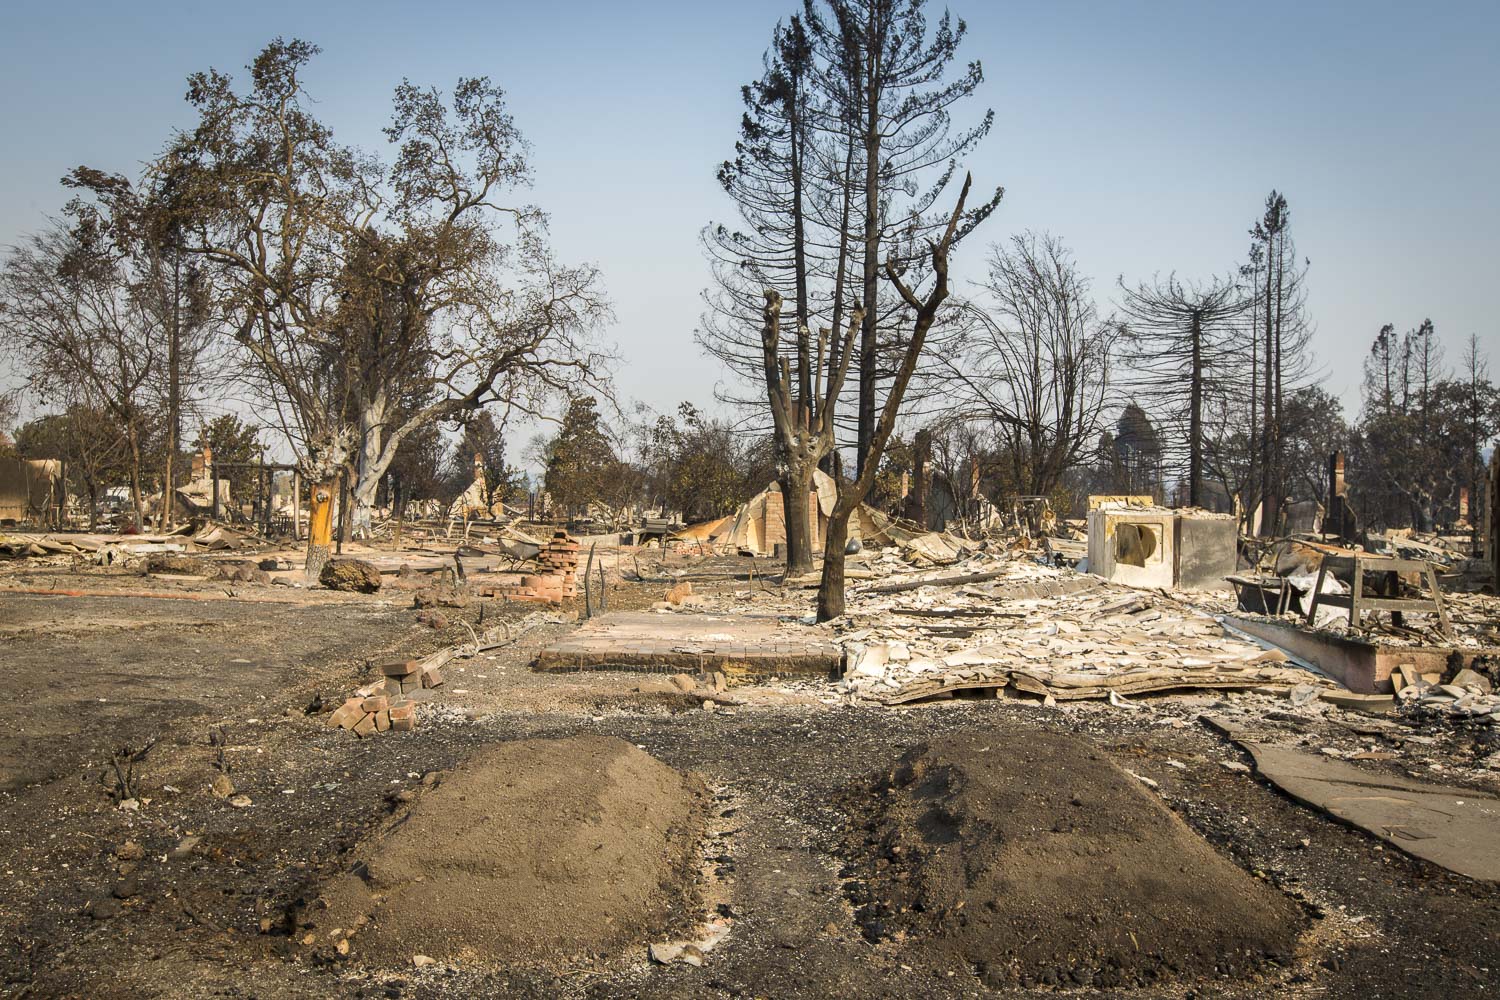  Fire aftermath in the Coffey Park neighborhood Oct. 13, 2017 in Santa Rosa, CA. 